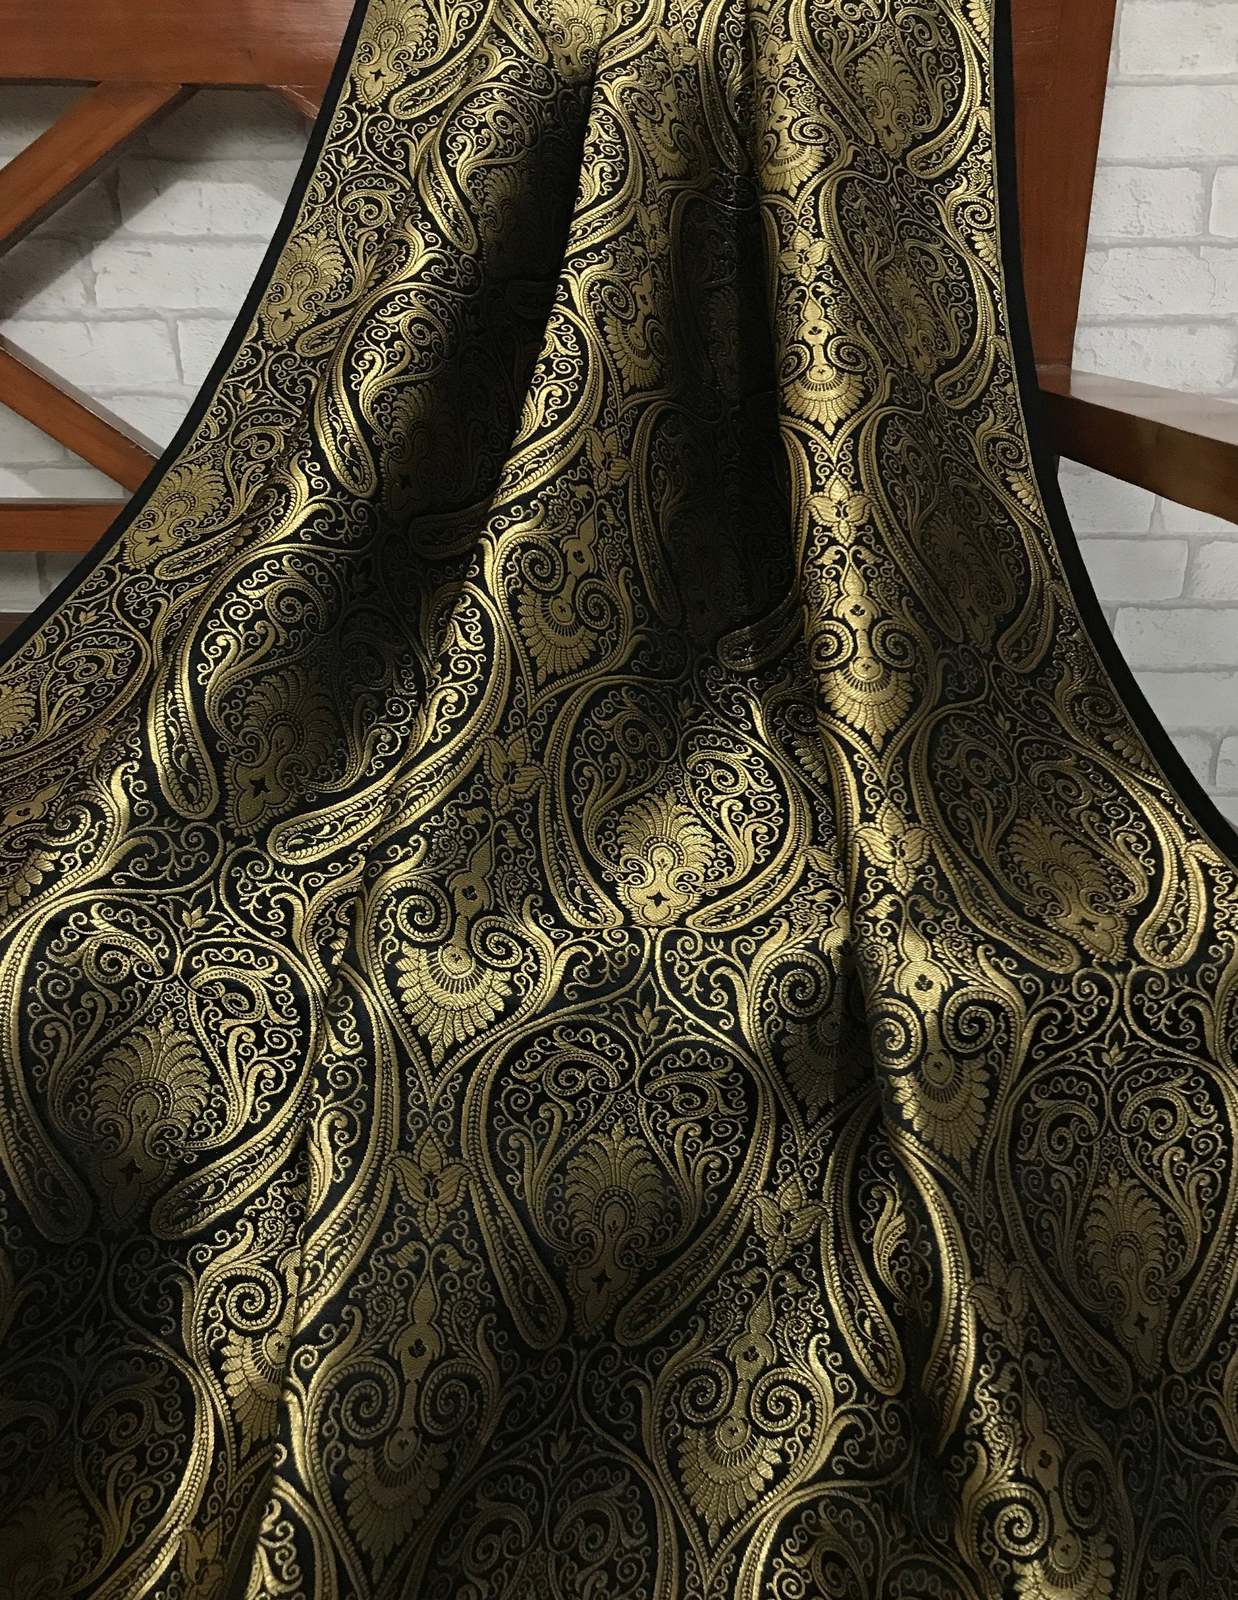 10%OFF Brocade Fabric, Kimkhab ,Black and Gold fabric by the yard/Meter NFAF144